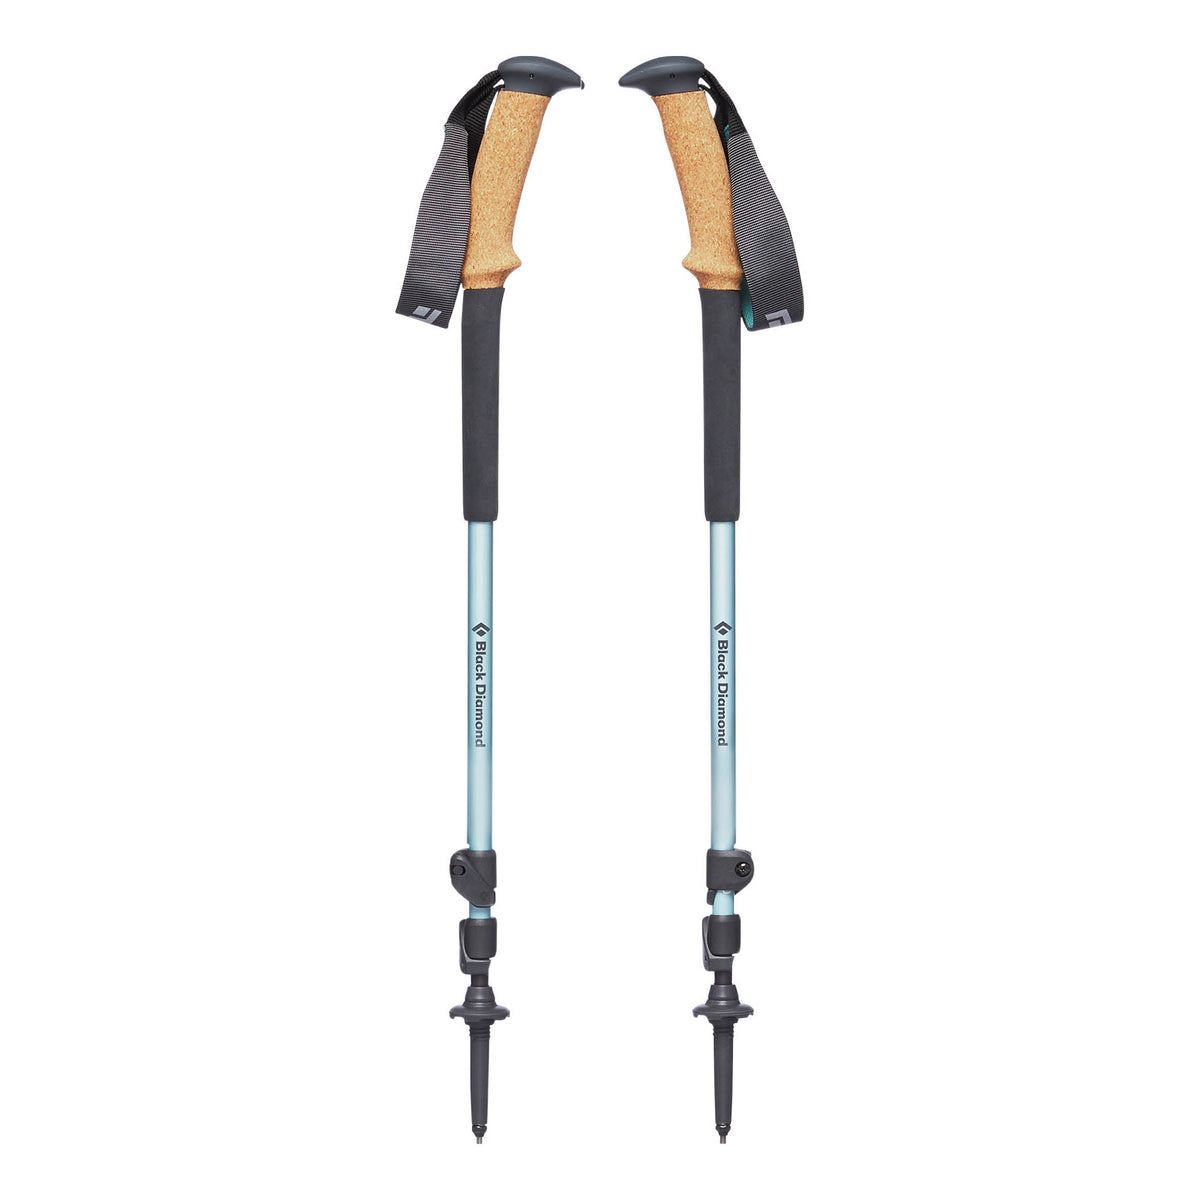 Pair of Black Diamond Trail Ergo Cork Women&#39;s poles, shown collapsed with angled cork handle